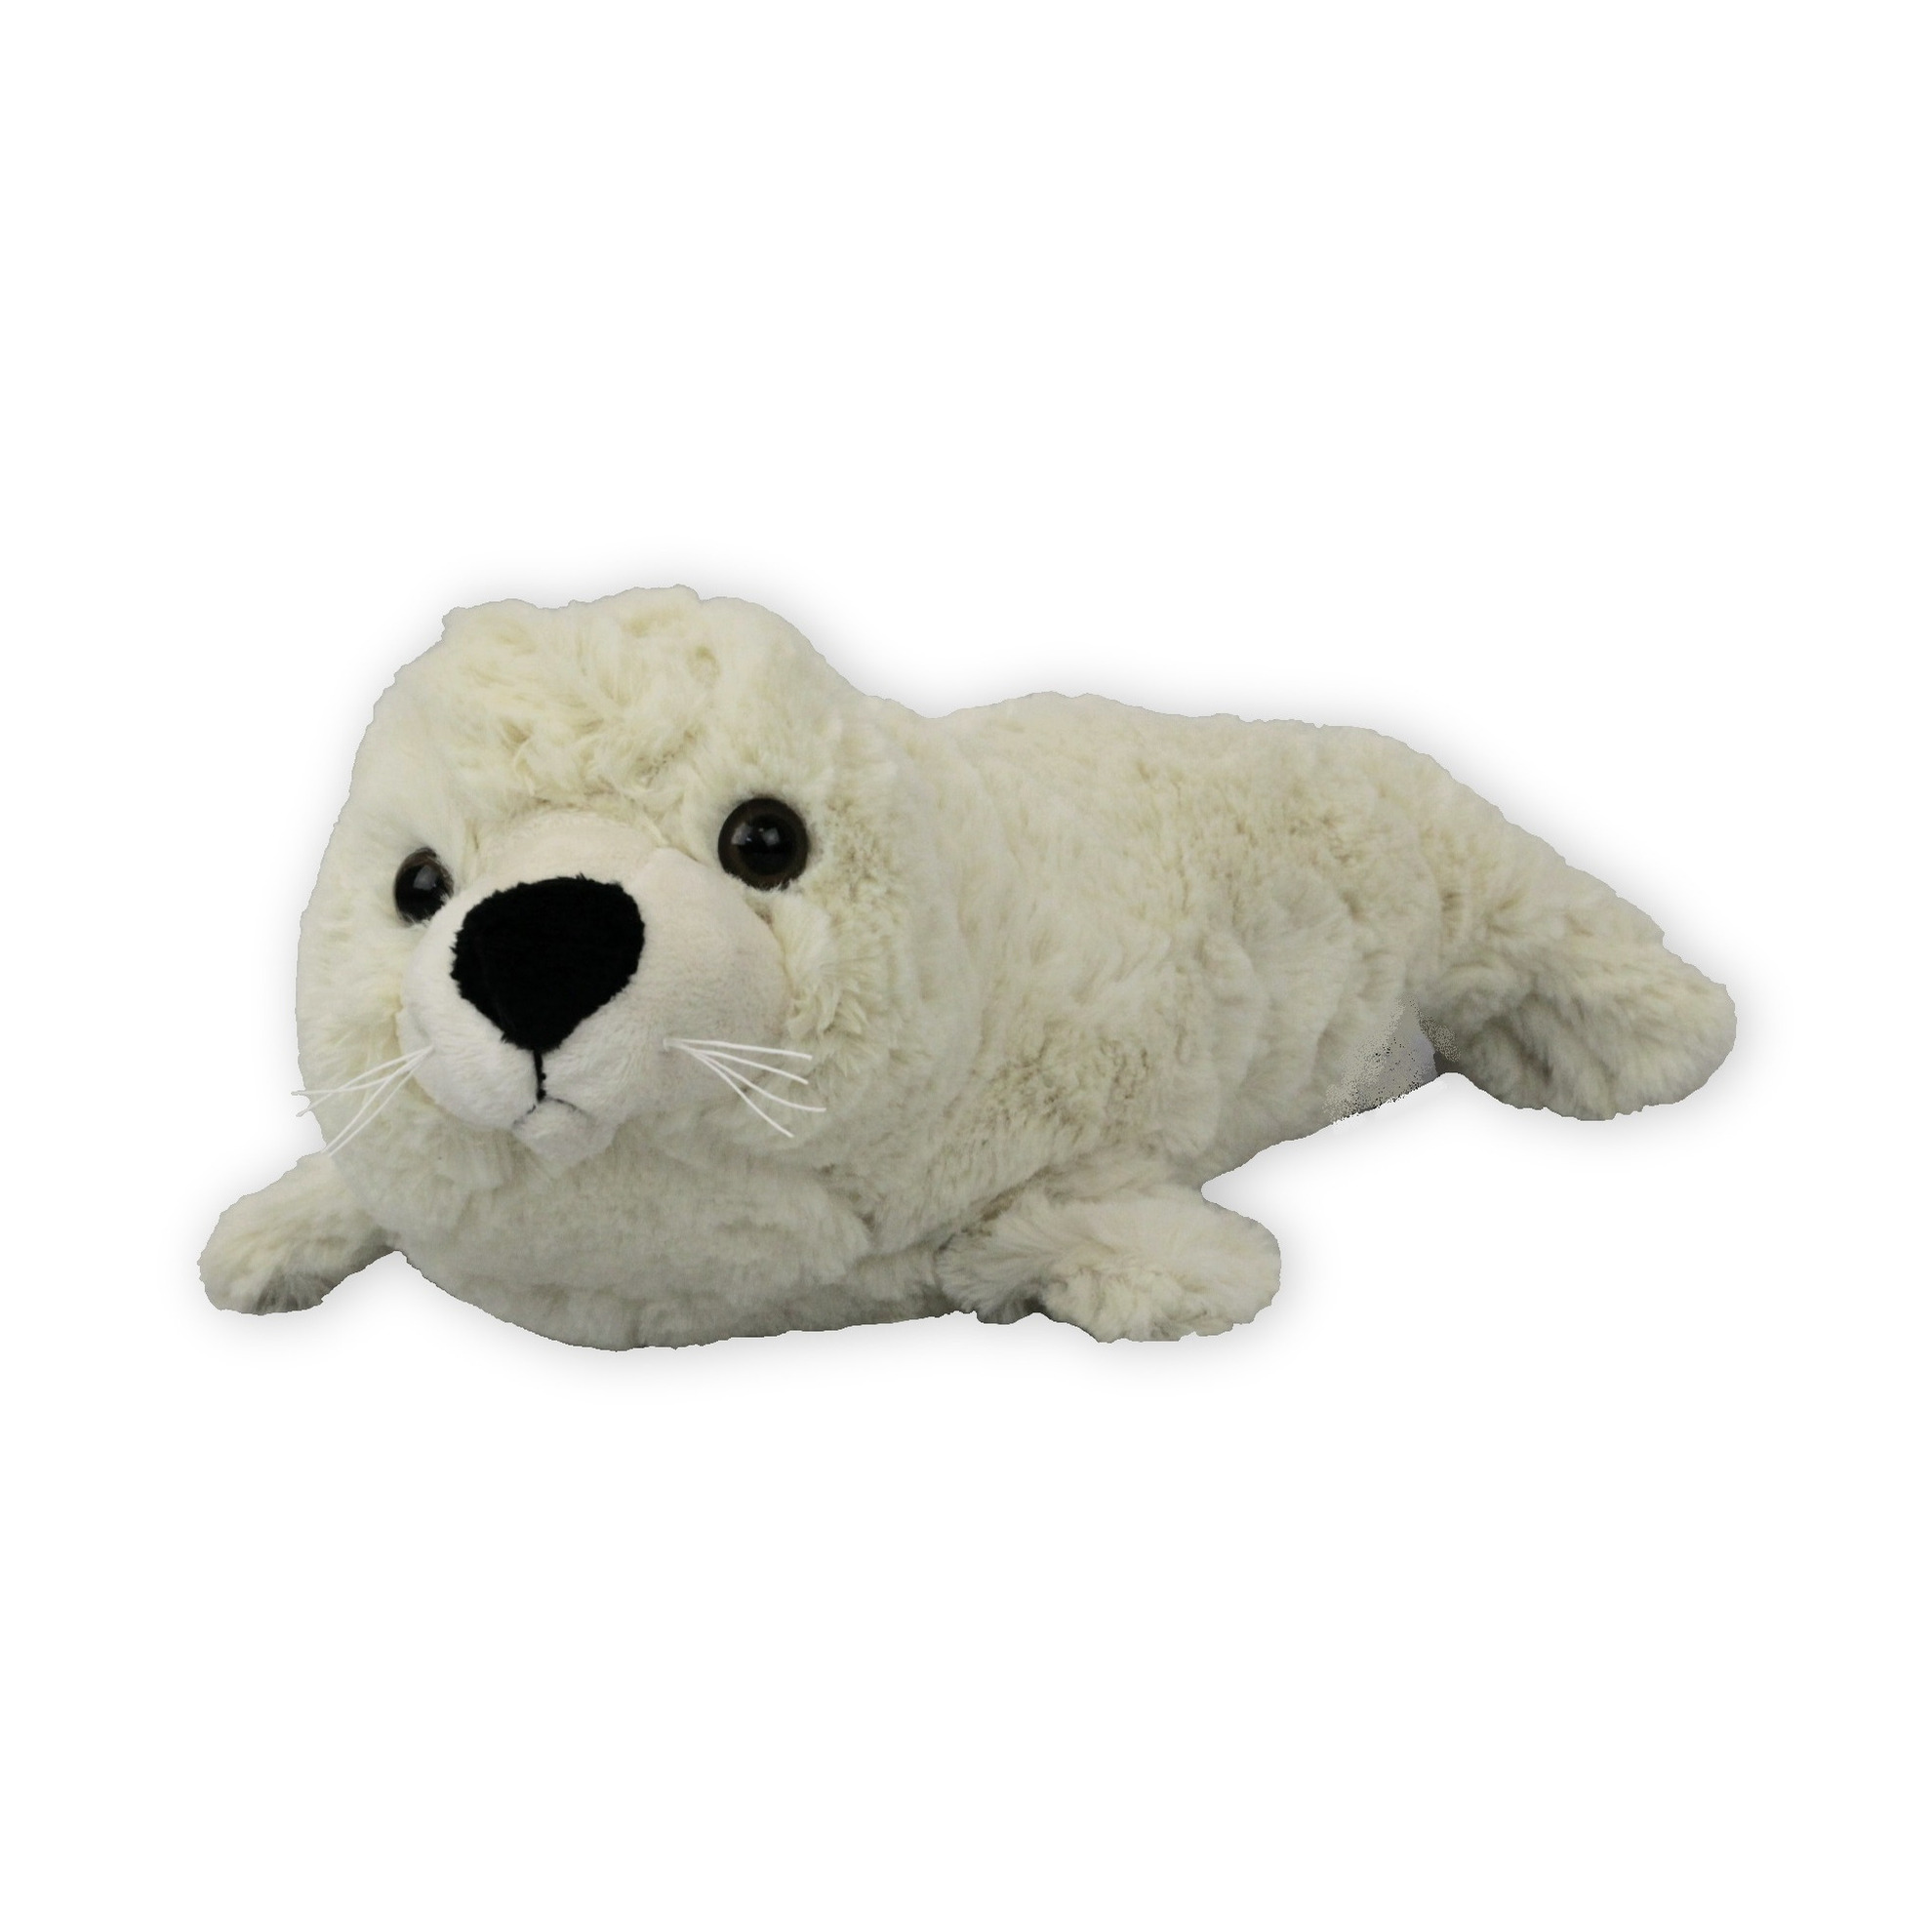 Inware Pluche zeehond pup knuffel - liggend - creme wit - polyester - 29 cm -